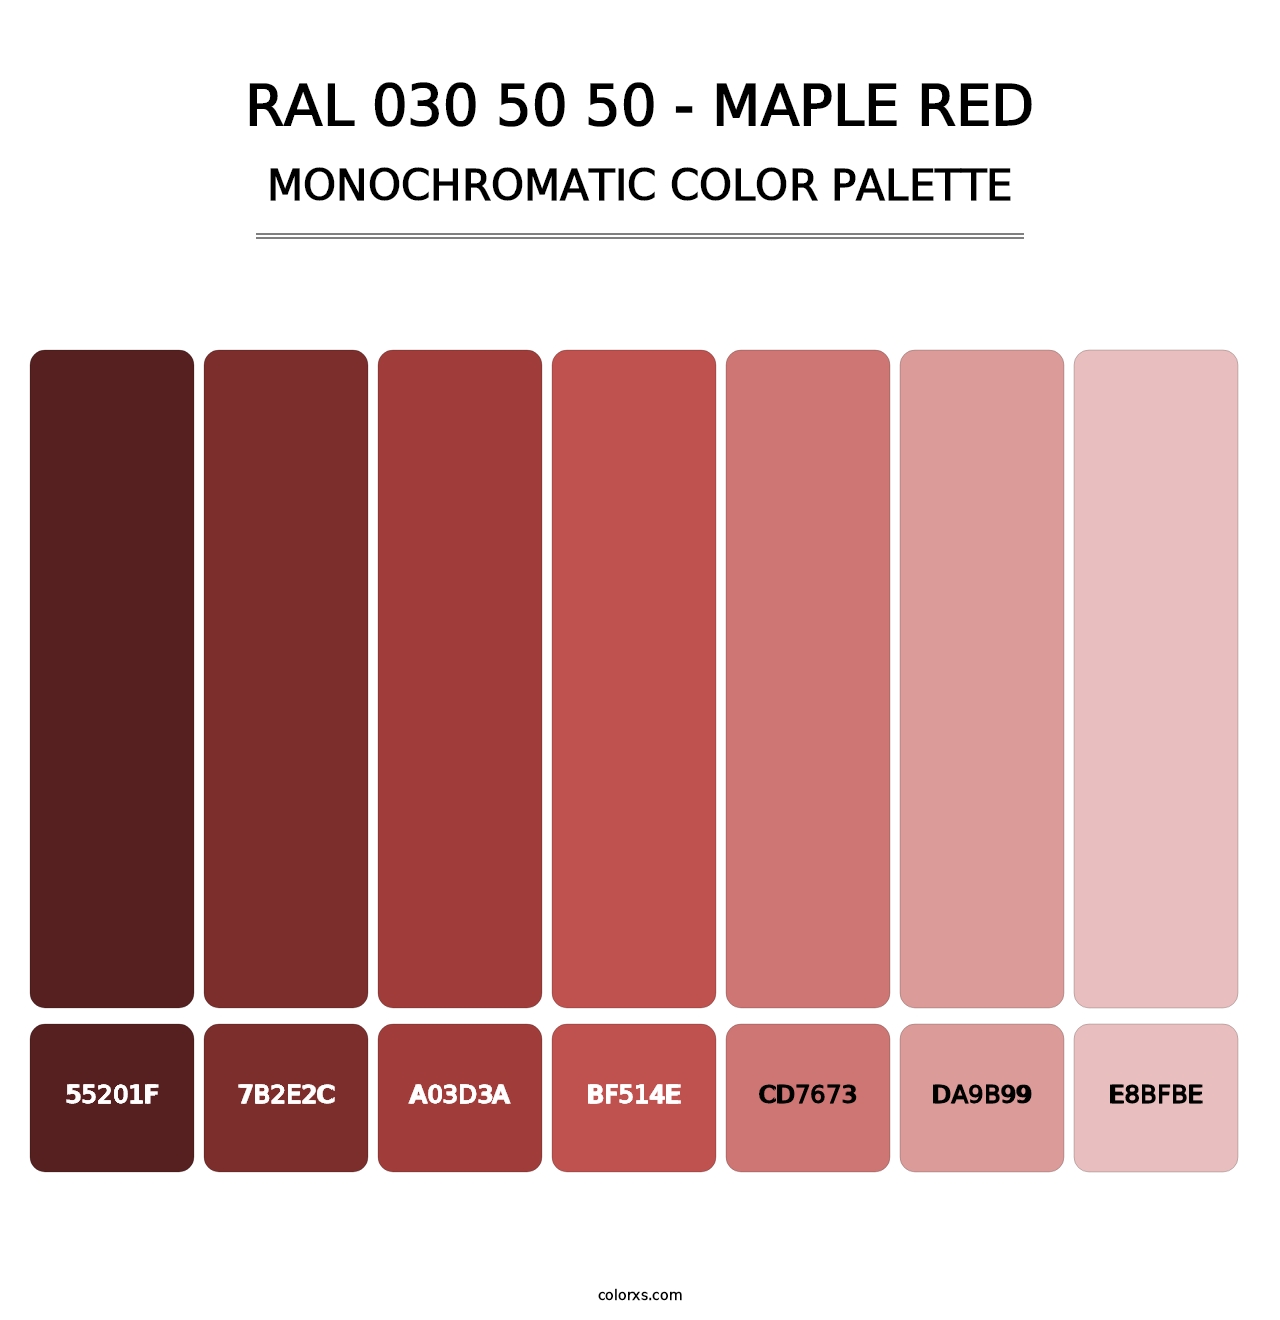 RAL 030 50 50 - Maple Red - Monochromatic Color Palette